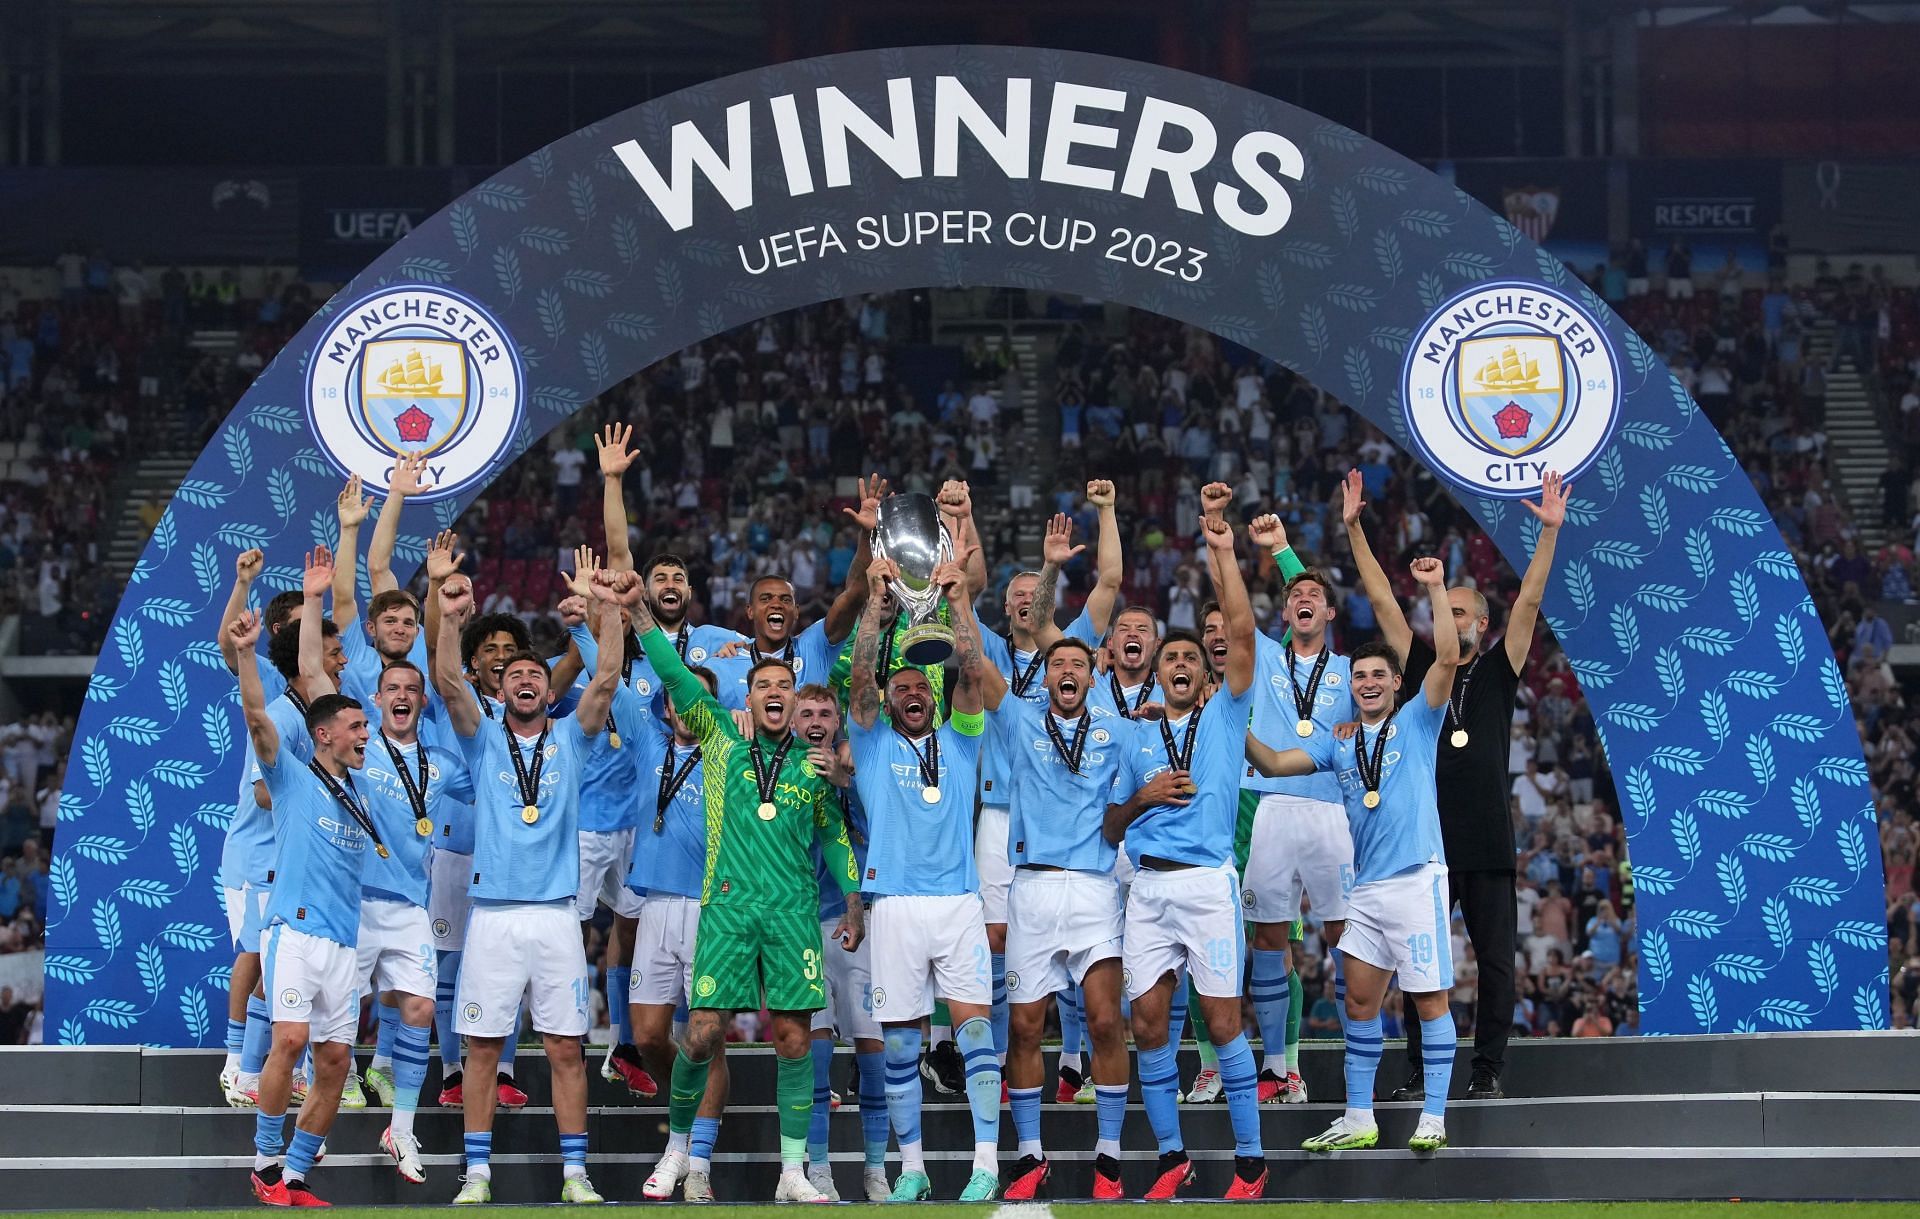 Manchester City won their second European trophy after beating Sevilla on penalties in the UEFA Super Cup